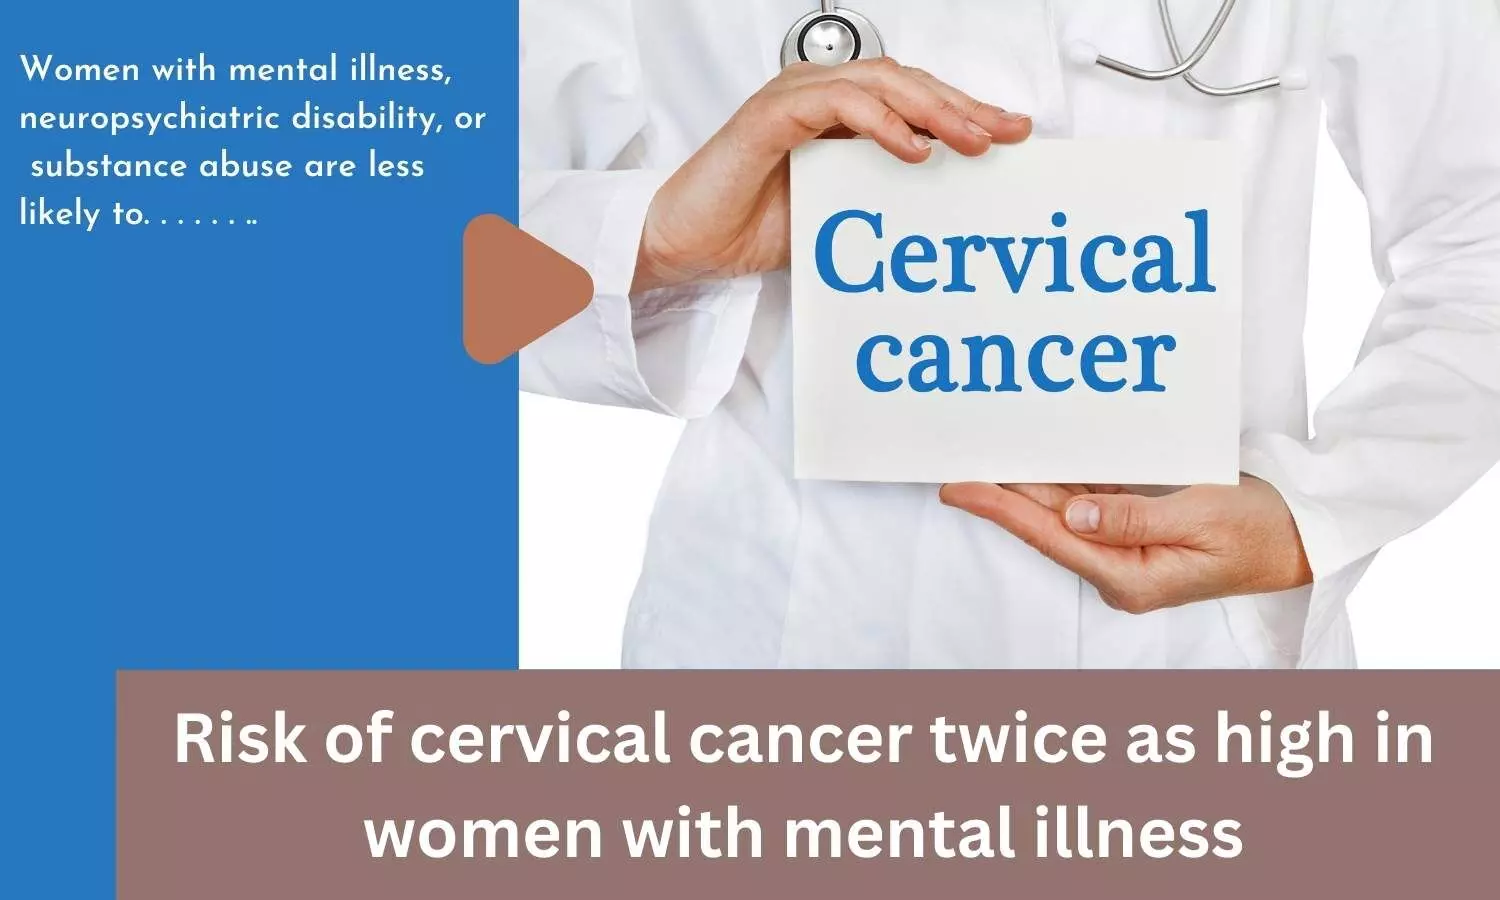 Risk of cervical cancer twice as high in women with mental illness